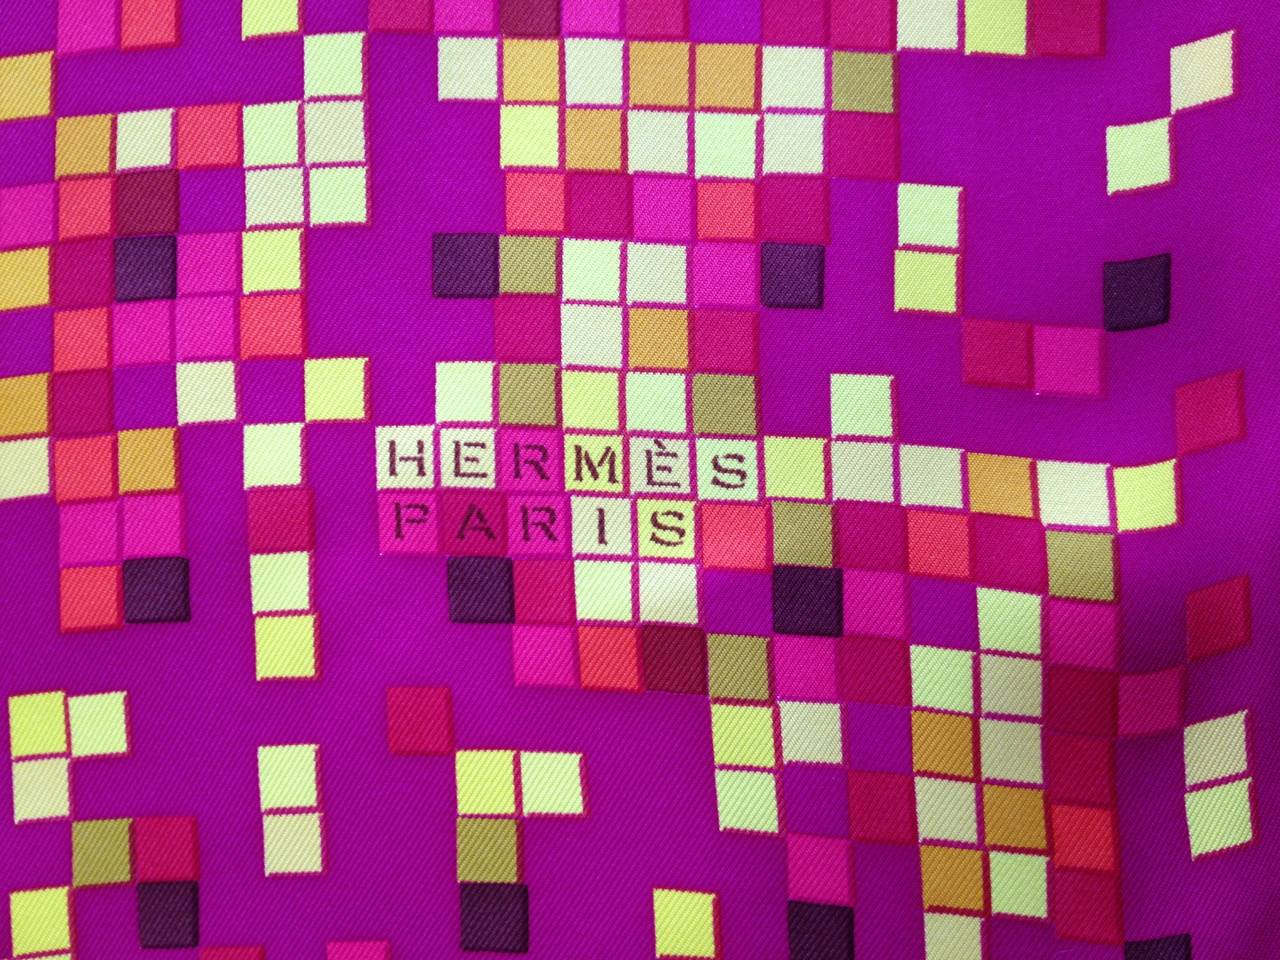 Such a beautiful constellation of colors. The Mosaique Au 24 scarf was designed by Benoit Pierre Emory for the spring 2008 collection, and also appears on much of the Hermes porcelain. The bright magenta and gold are perfect complements to each